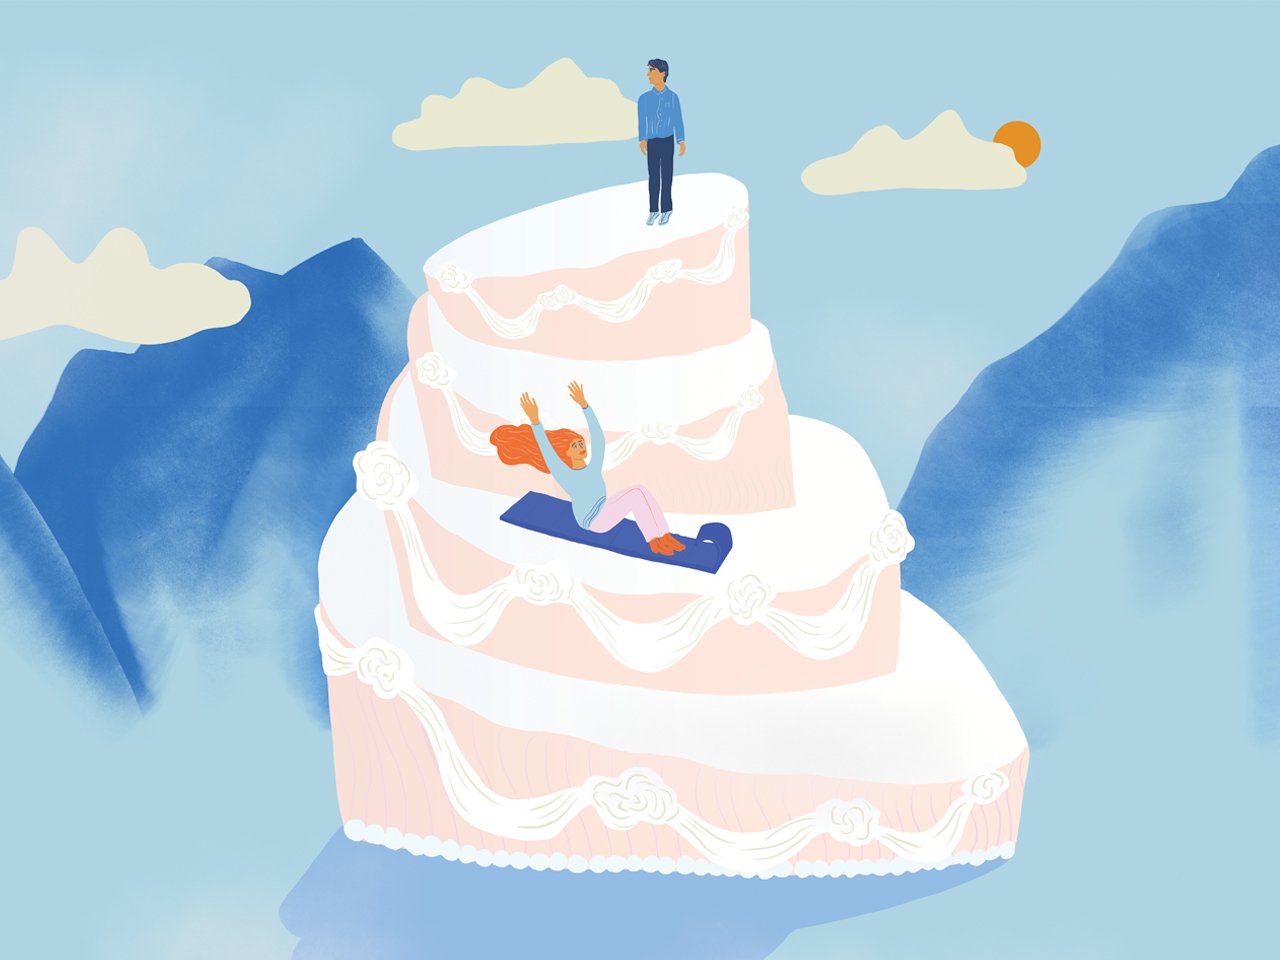 So You Want A Divorce. Now What?